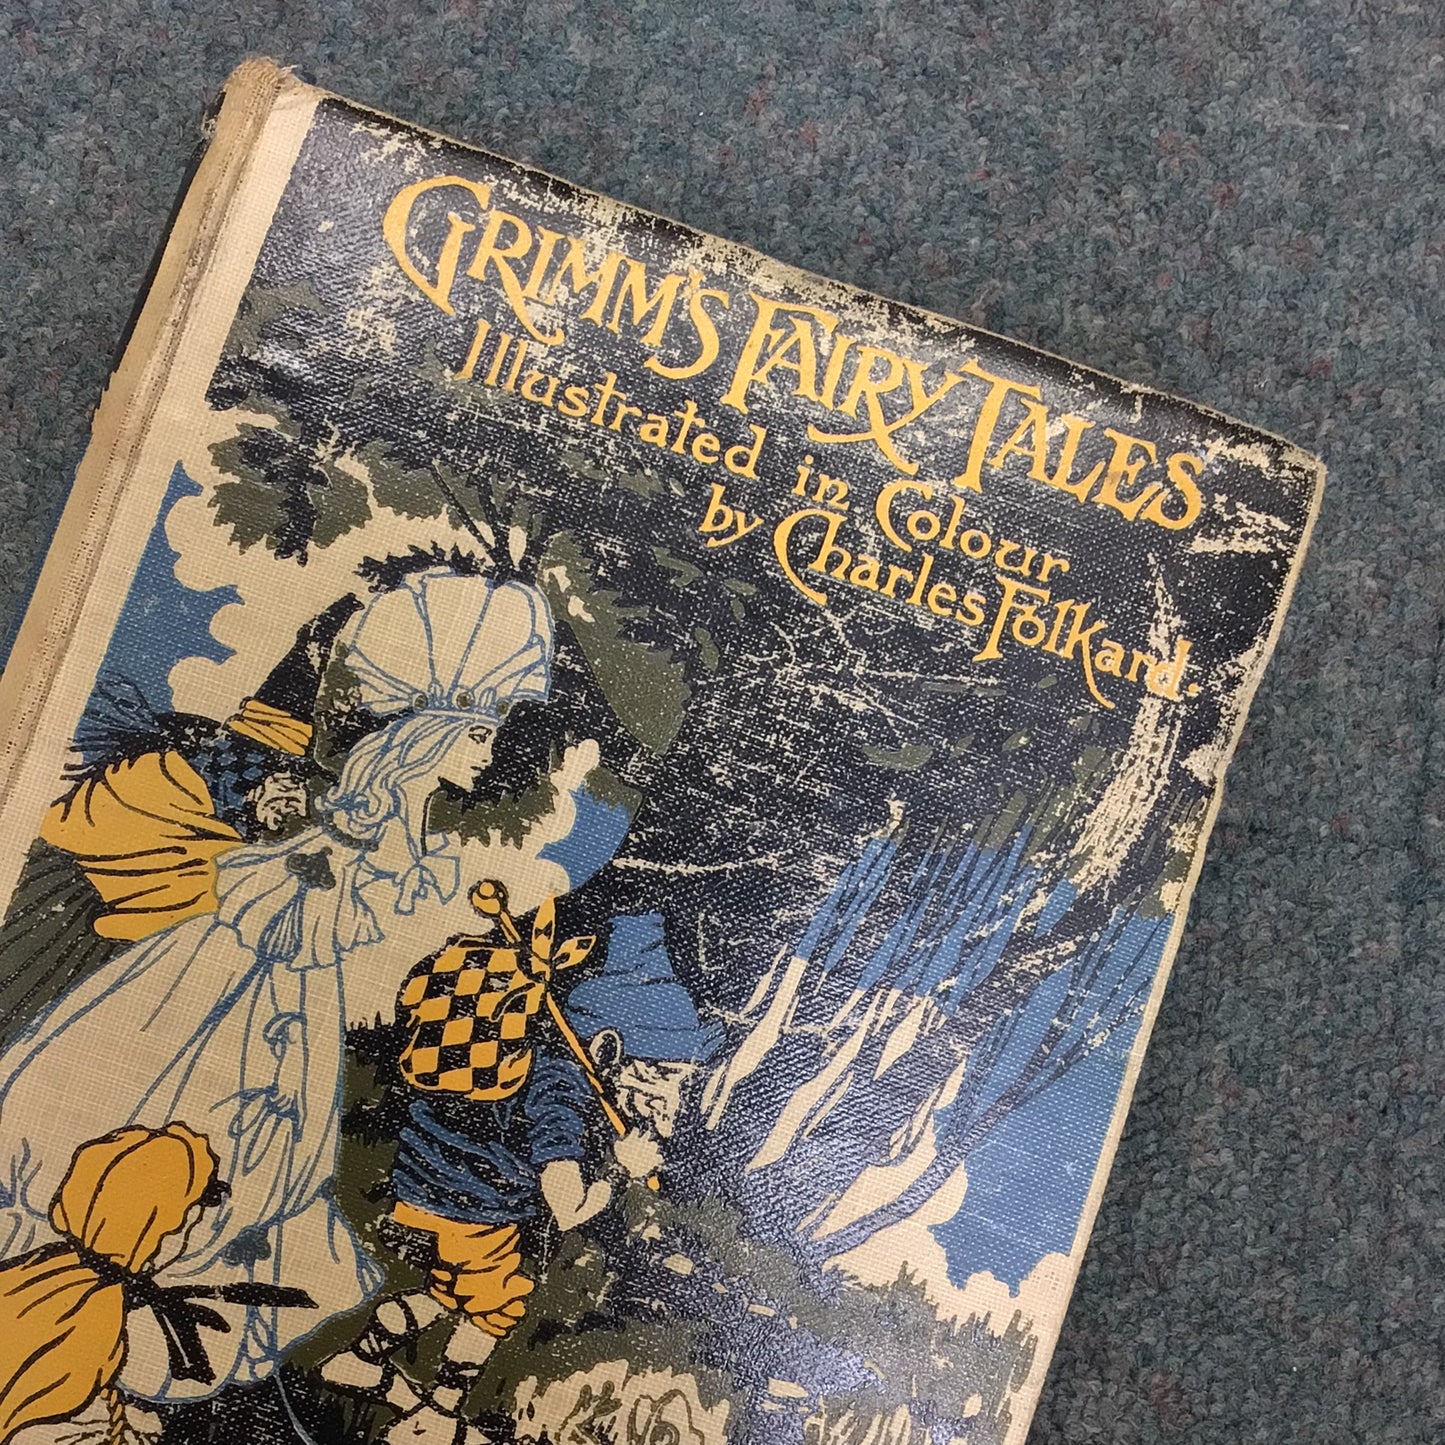 Grimm's Fairy Tales Illustrated in colour by Charles Folkard (1911)